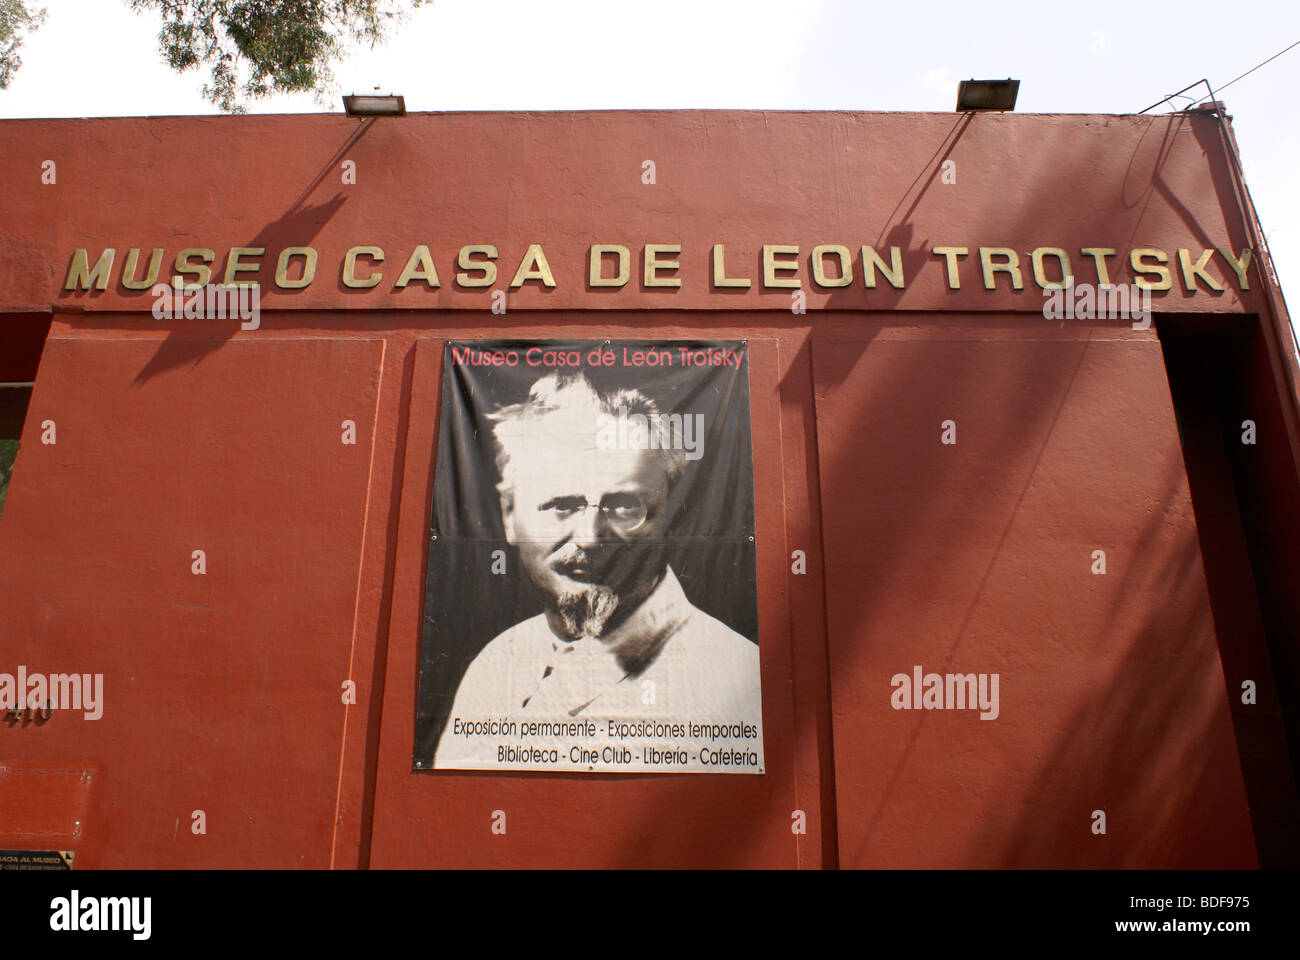 The Museo Casa de Leon Trotsky or Leon Trotsky House Museum in Coyoacan, Mexico City Stock Photo